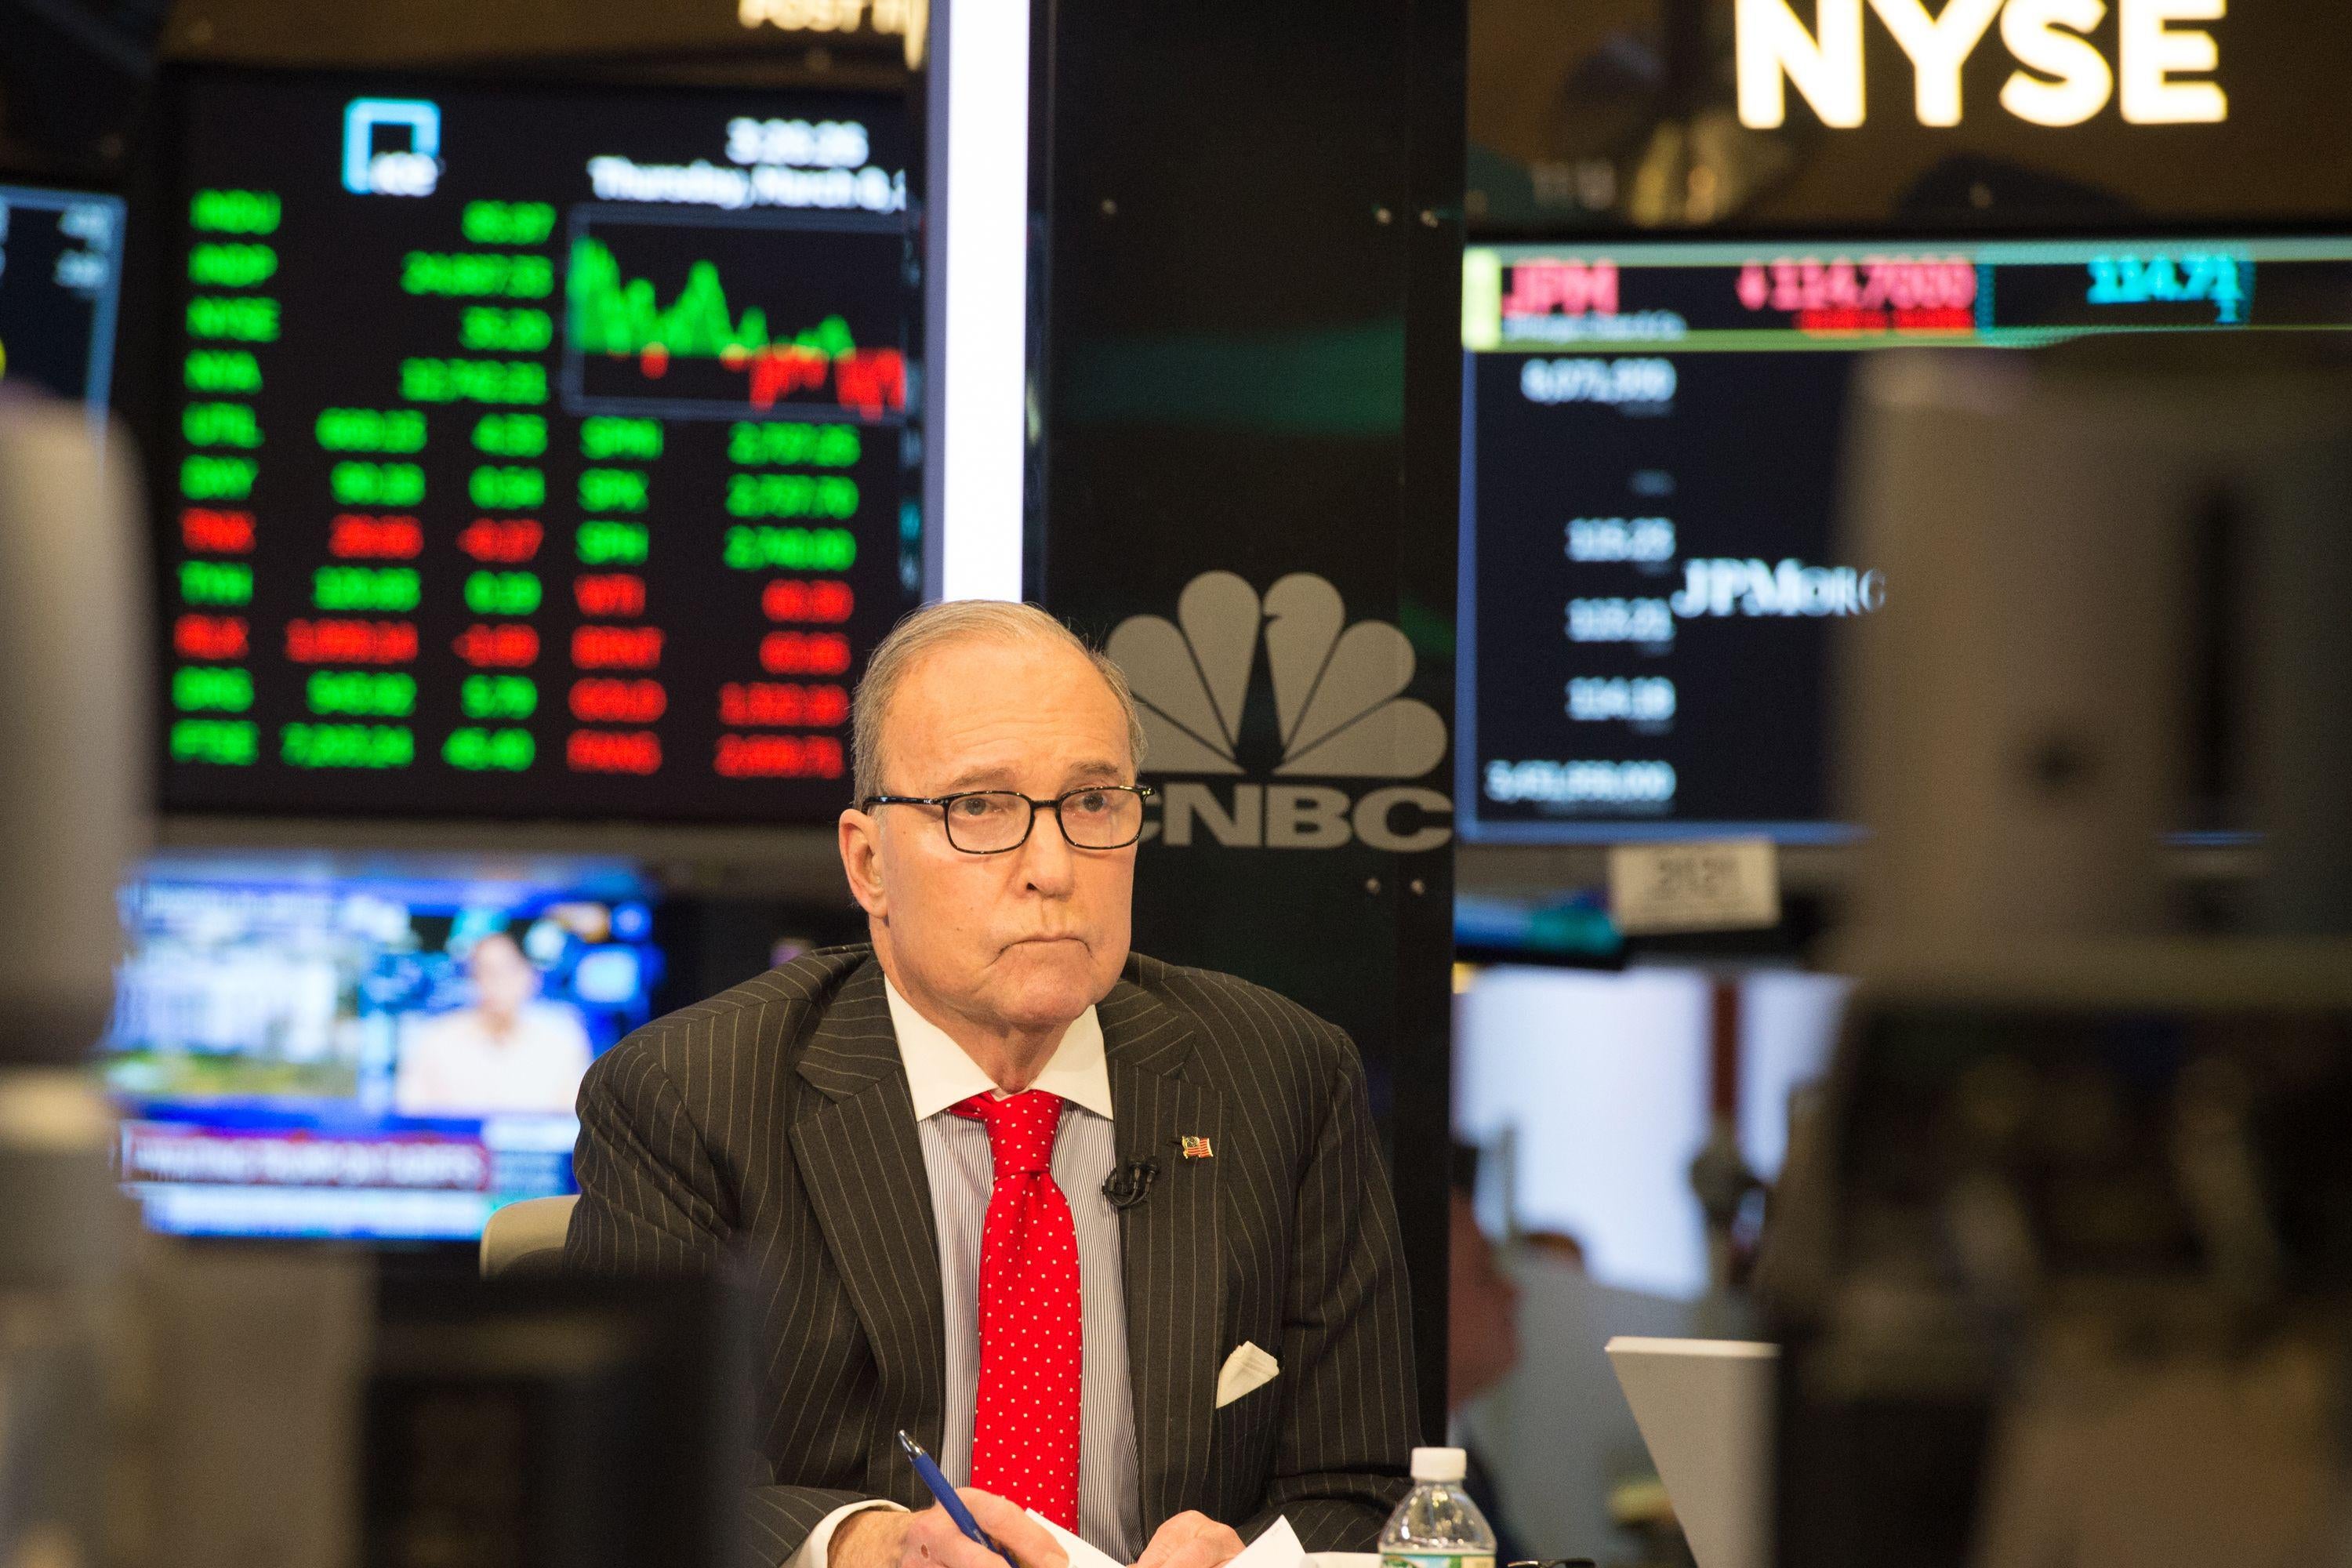 US conservative commentator and economic analyst Larry Kudlow speaks on the set of CNBC at the closing bell of the Dow Industrial Average at the New York Stock Exchange on March 8, 2018 in New York.  / AFP PHOTO / Bryan R. Smith        (Photo credit should read BRYAN R. SMITH/AFP/Getty Images)